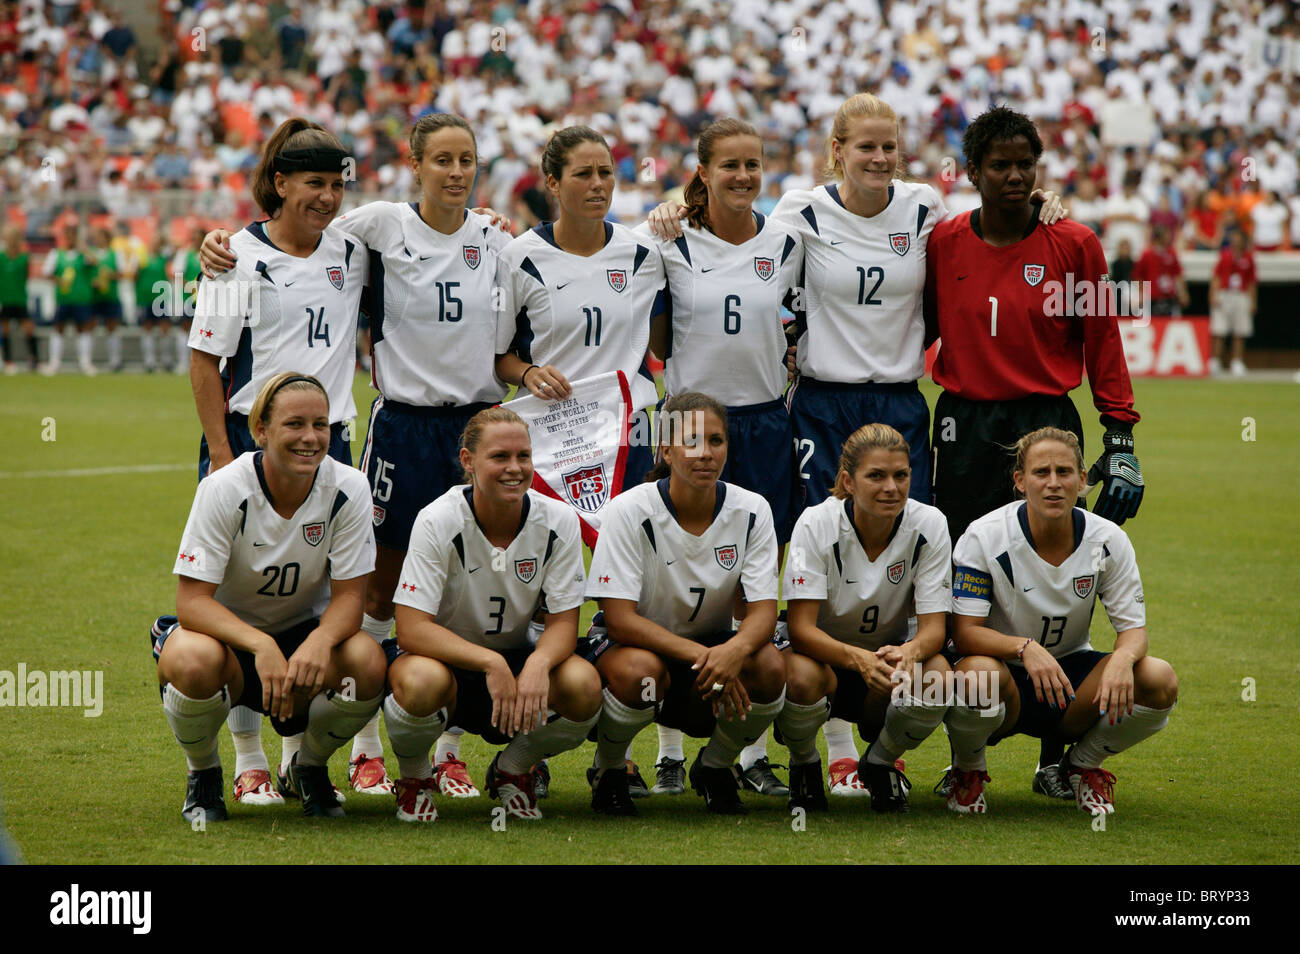 The USA National Team starting eleven lines up prior to a 2003 Women's World Cup soccer match against Sweden (details in desc). Stock Photo